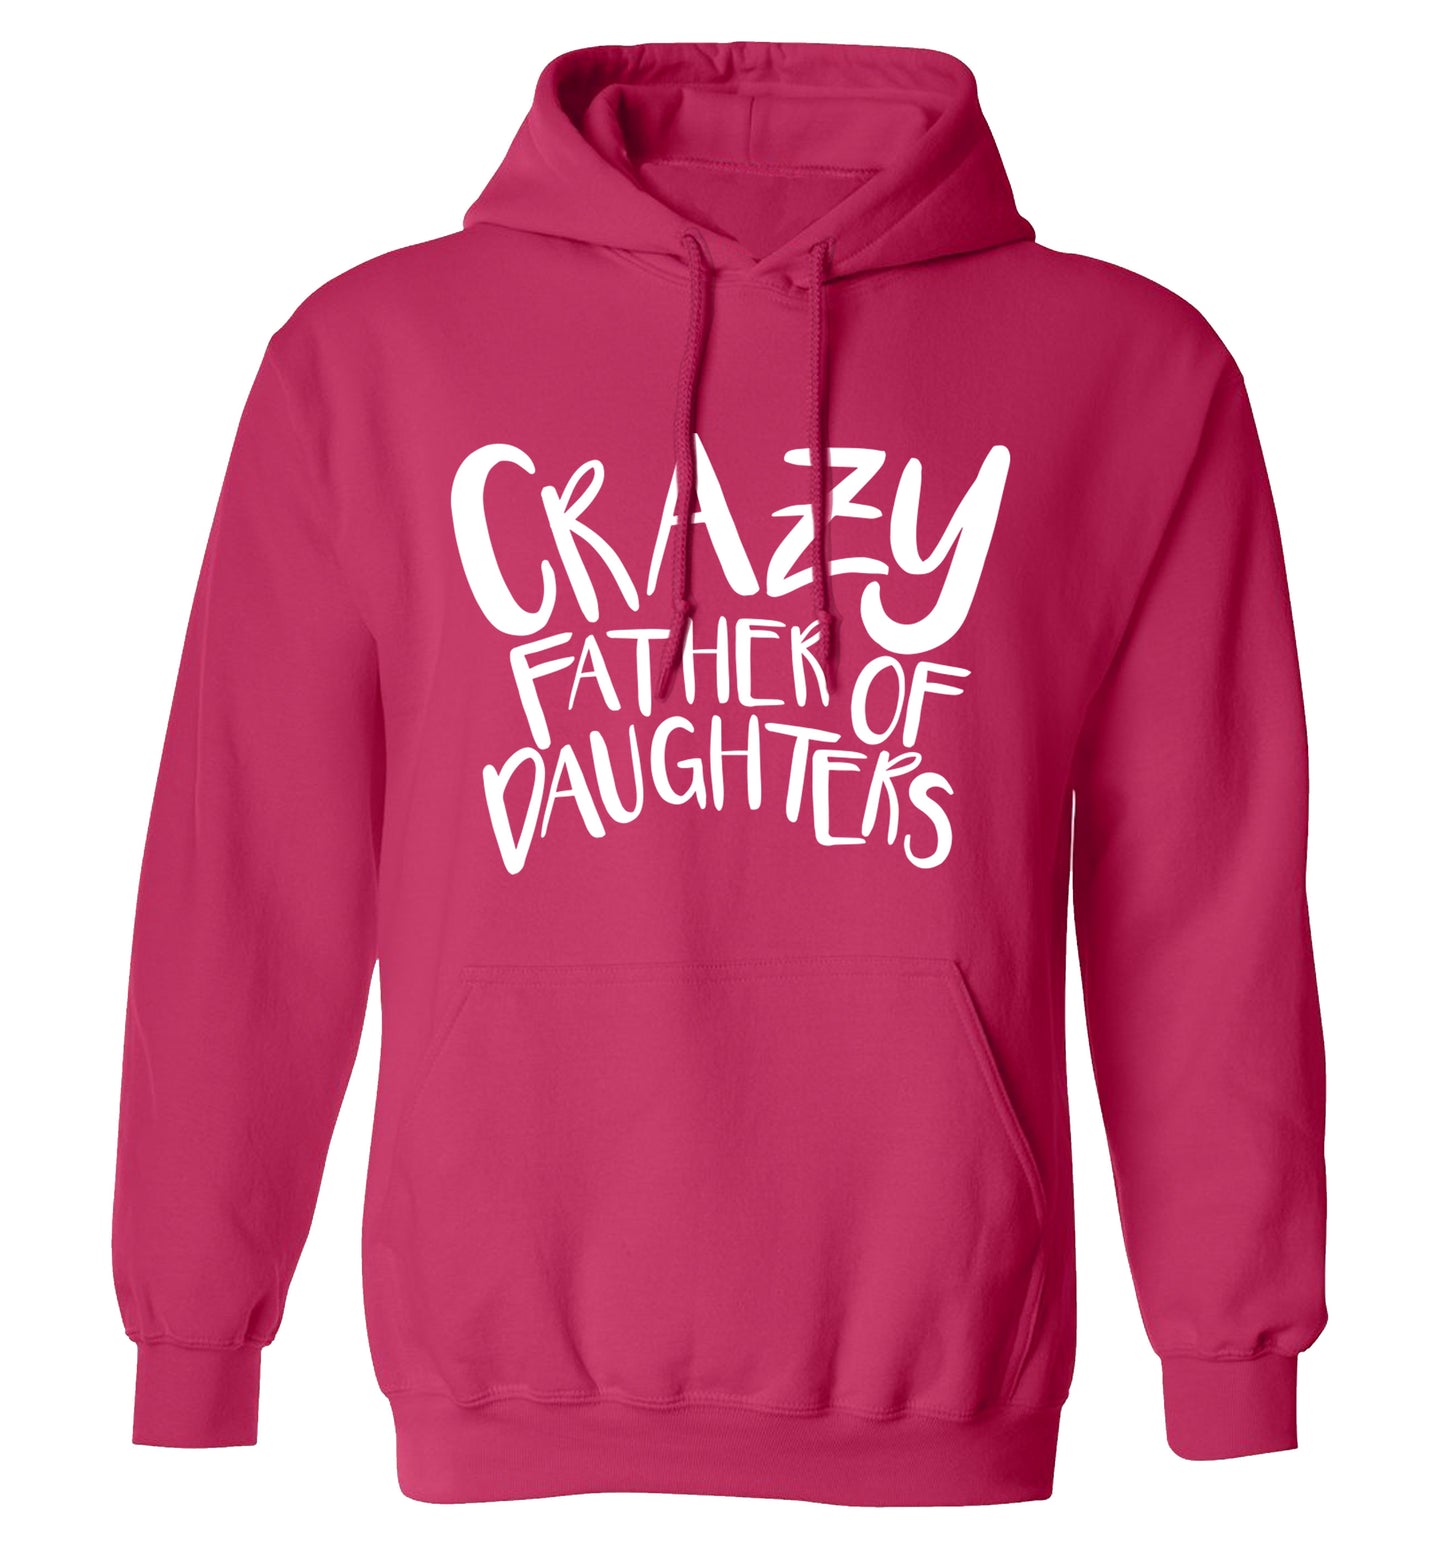 Crazy father of daughters adults unisex pink hoodie 2XL